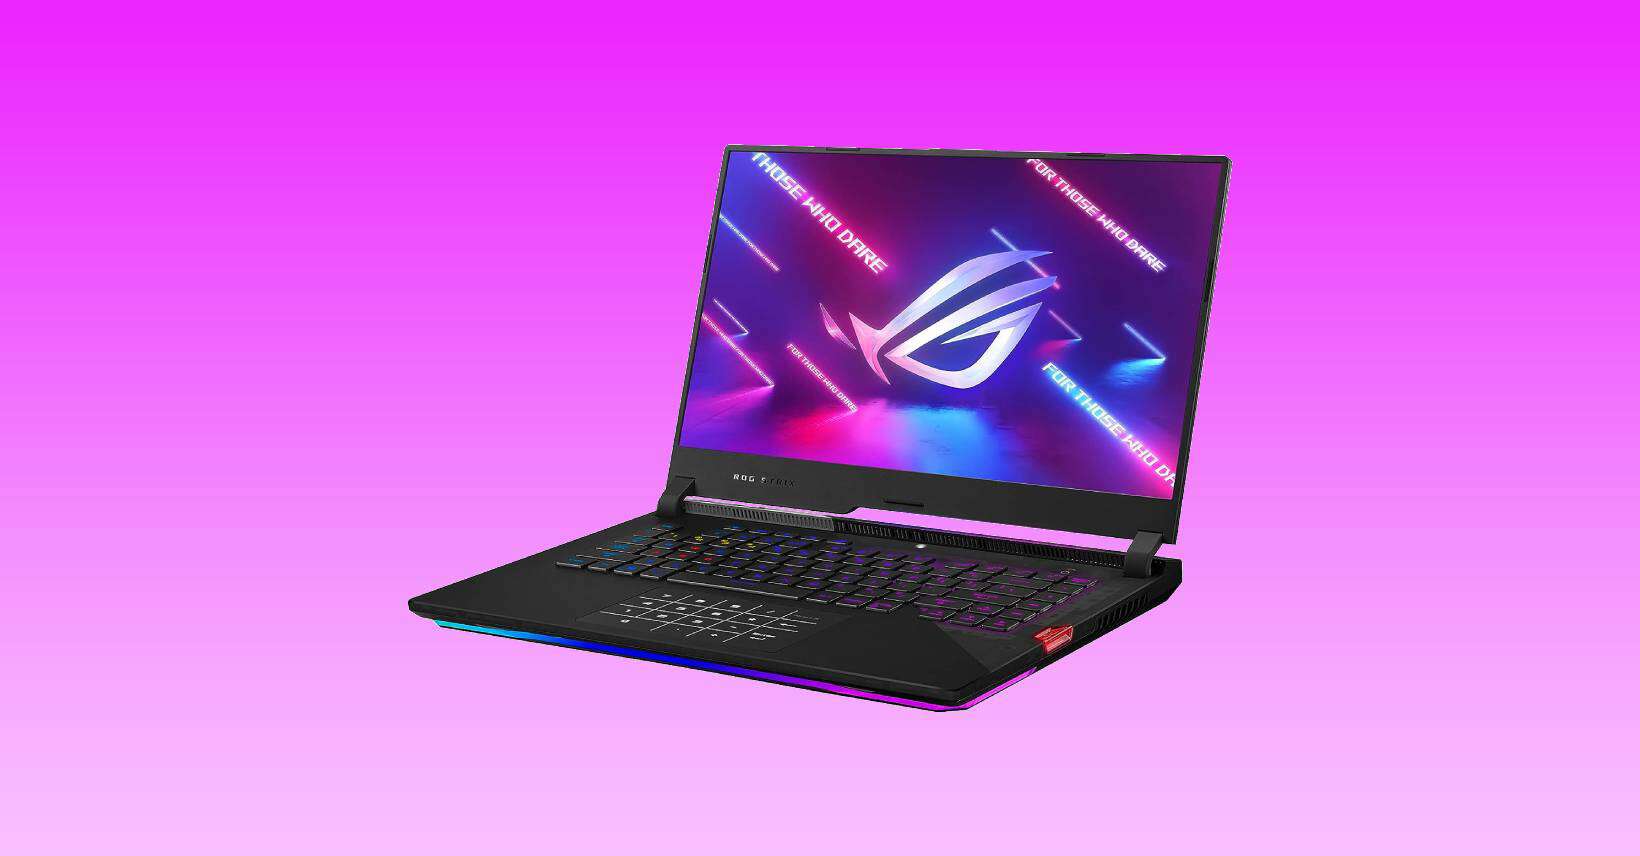 This ASUS ROG RTX 3080 gaming laptop is now over $1000 off on Amazon